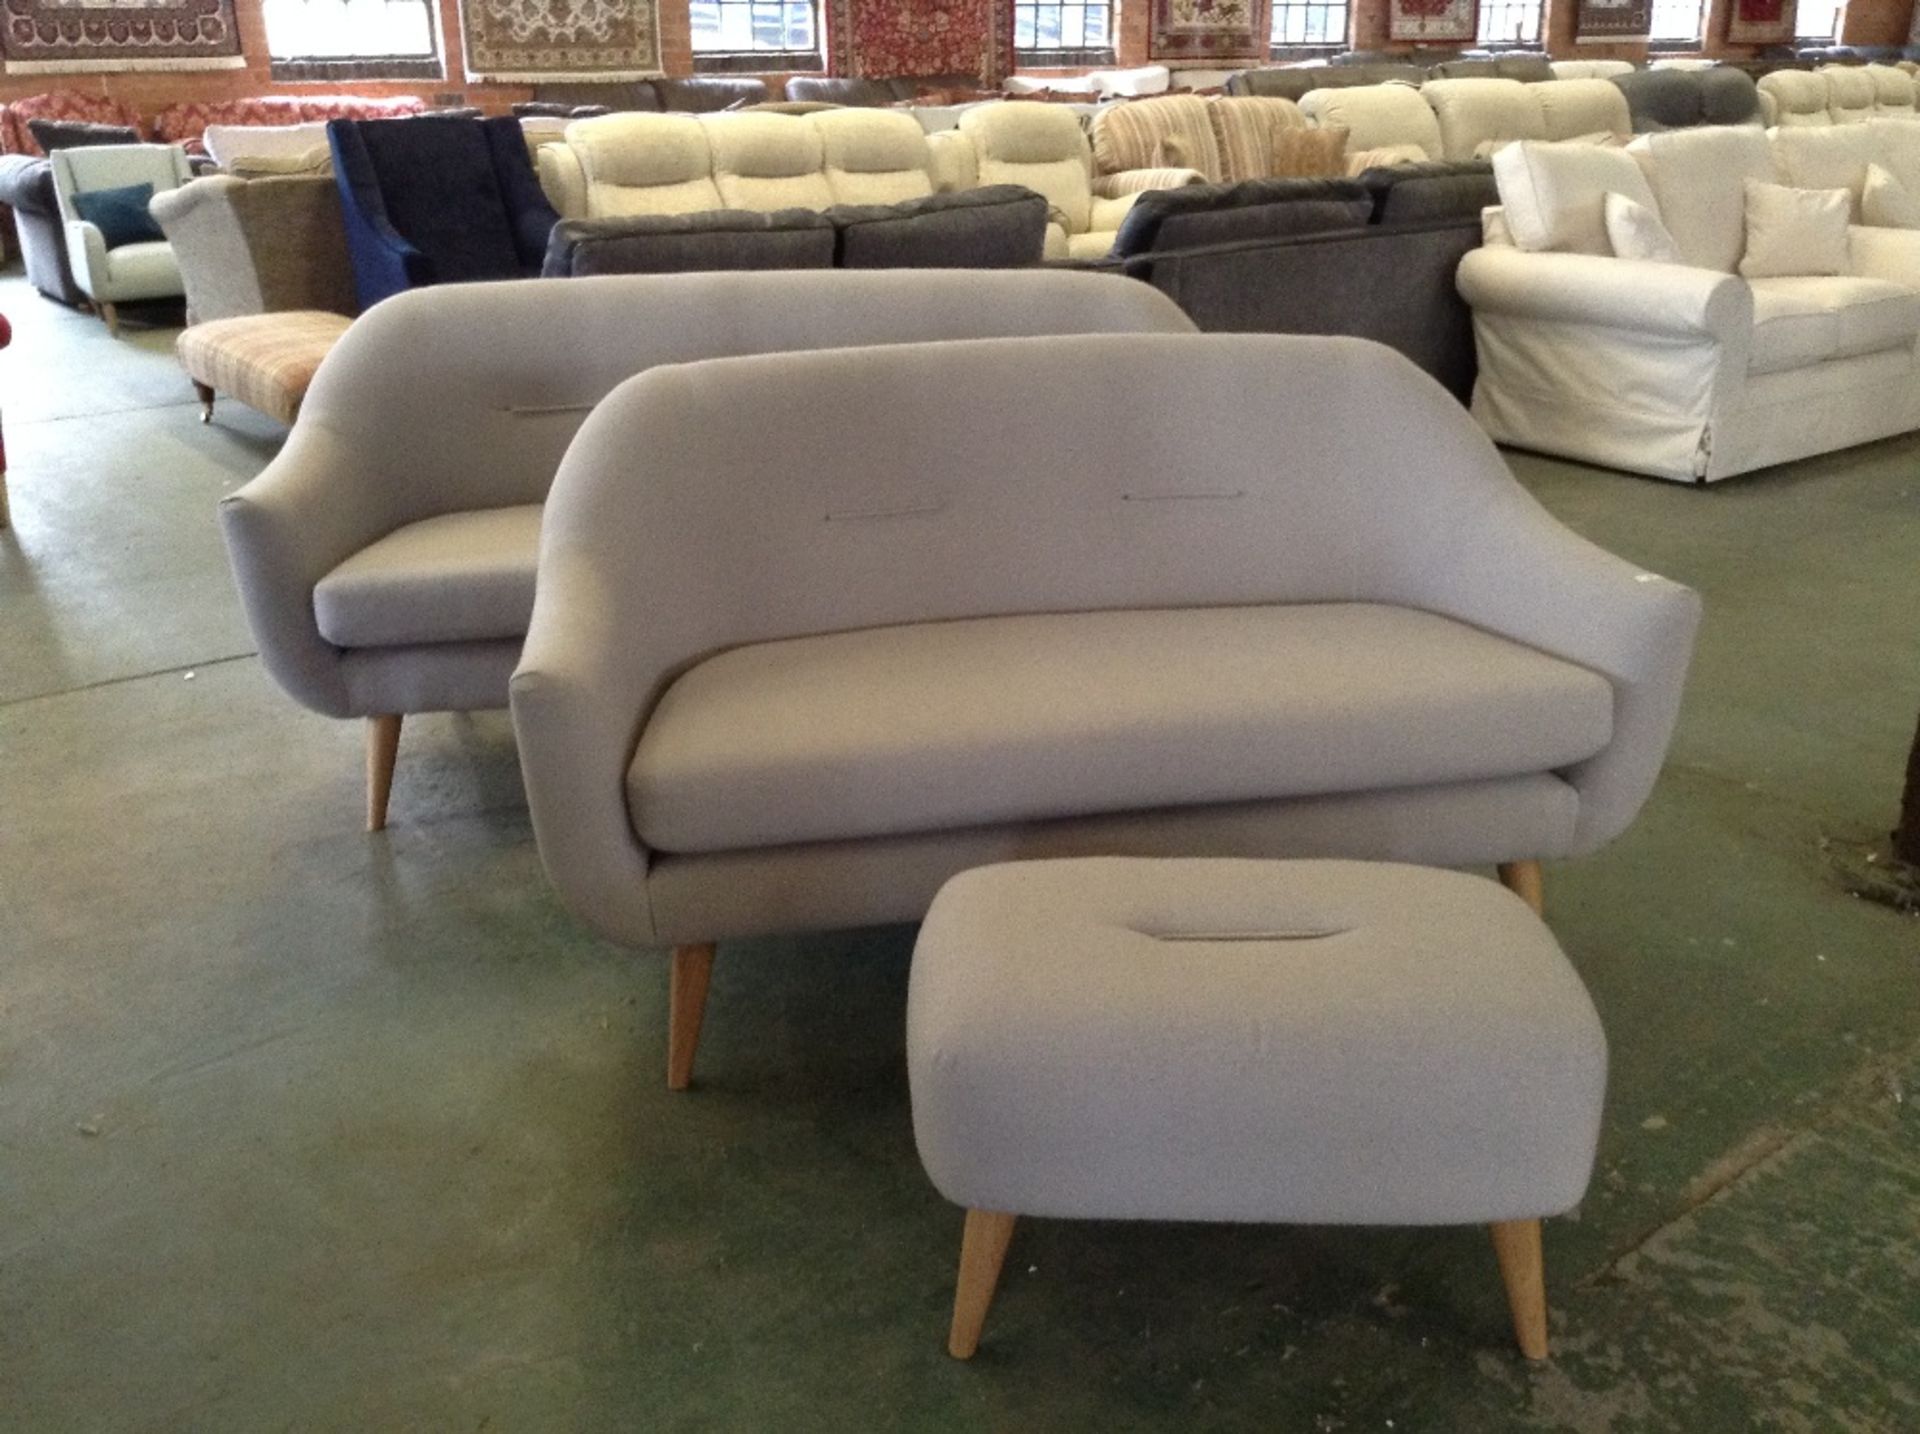 GREY 3 SEATER SOFA, 2 SEATER SOFA AND FOOTSTOOL